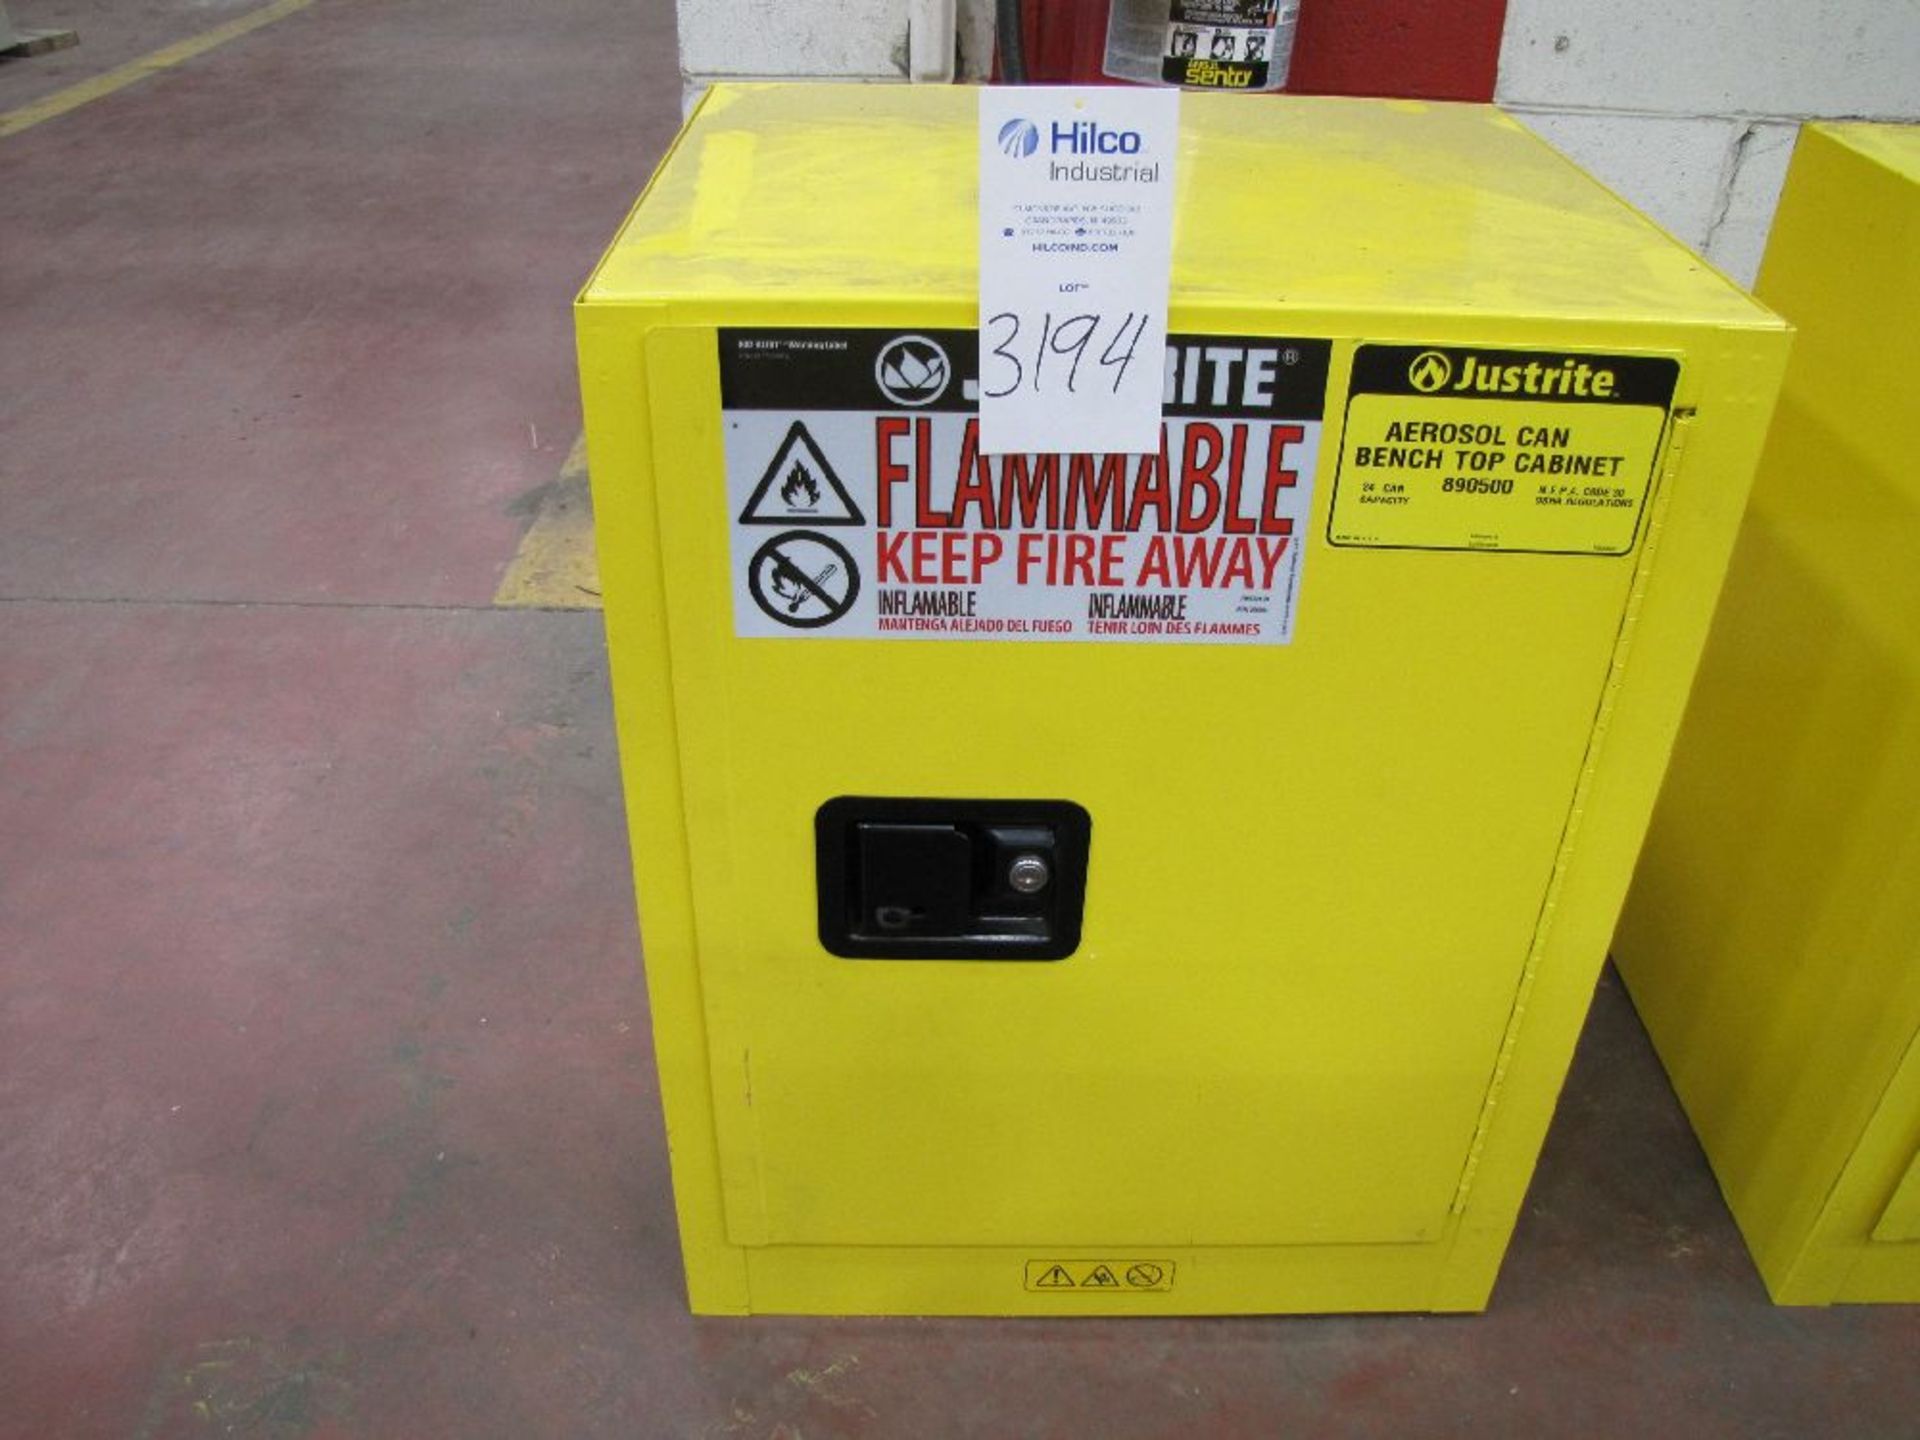 Justrite Model 890500 Flammable Aerosol Can Benchtop Storage Cabinet